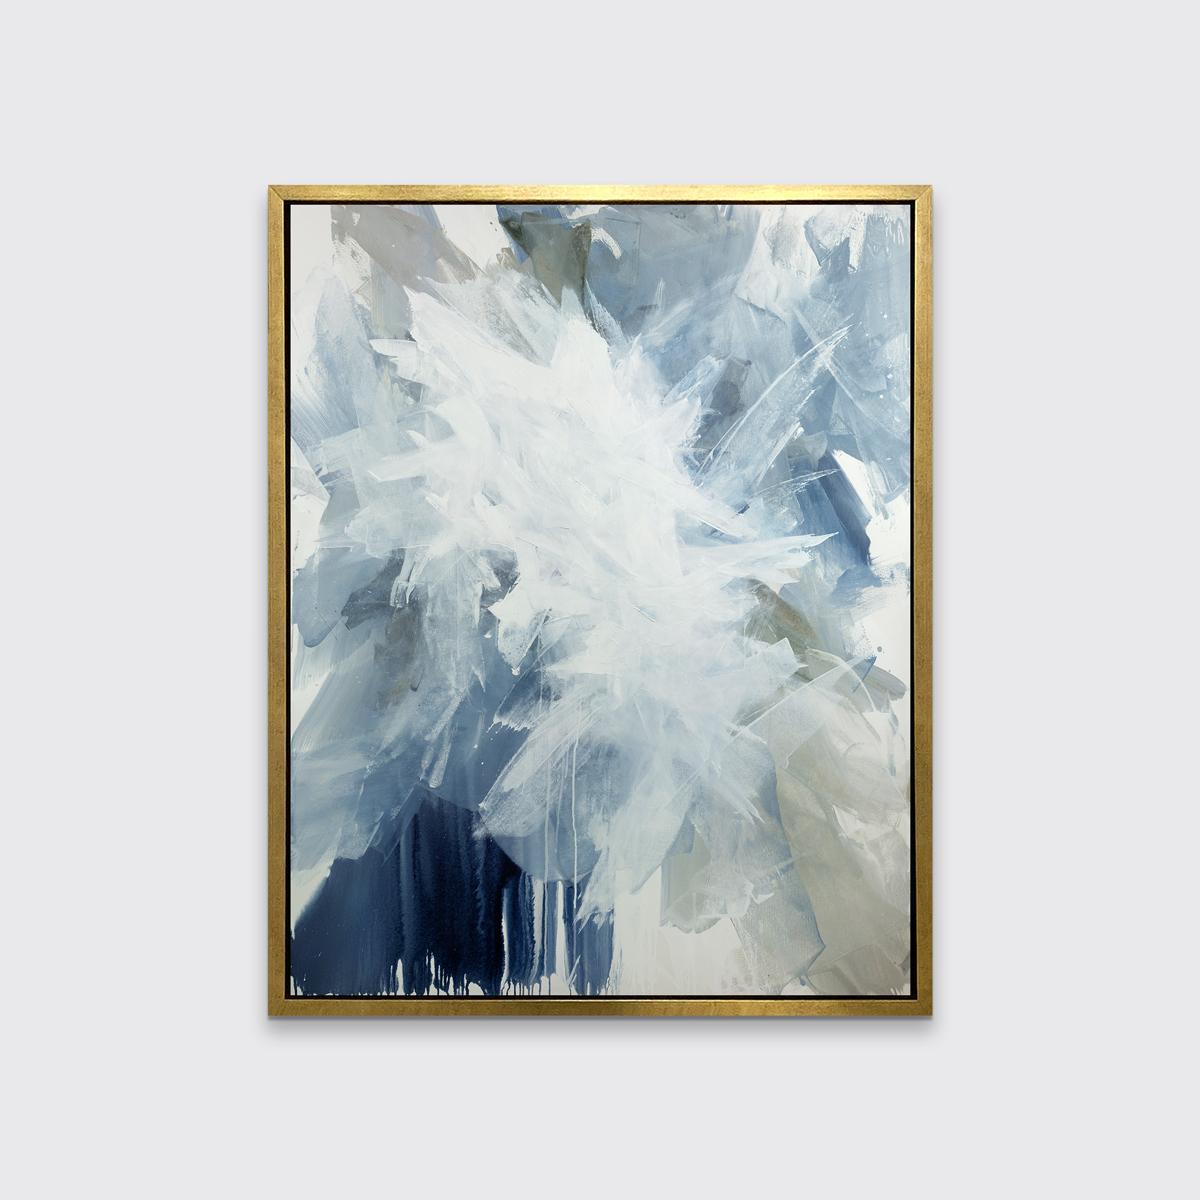 This contemporary limited edition print by Teodora Guererra features large, energetic strokes of varying blue tines which blend with a warm neutral greige and white overtop, adding depth and dimension to the abstract composition. 

This Limited